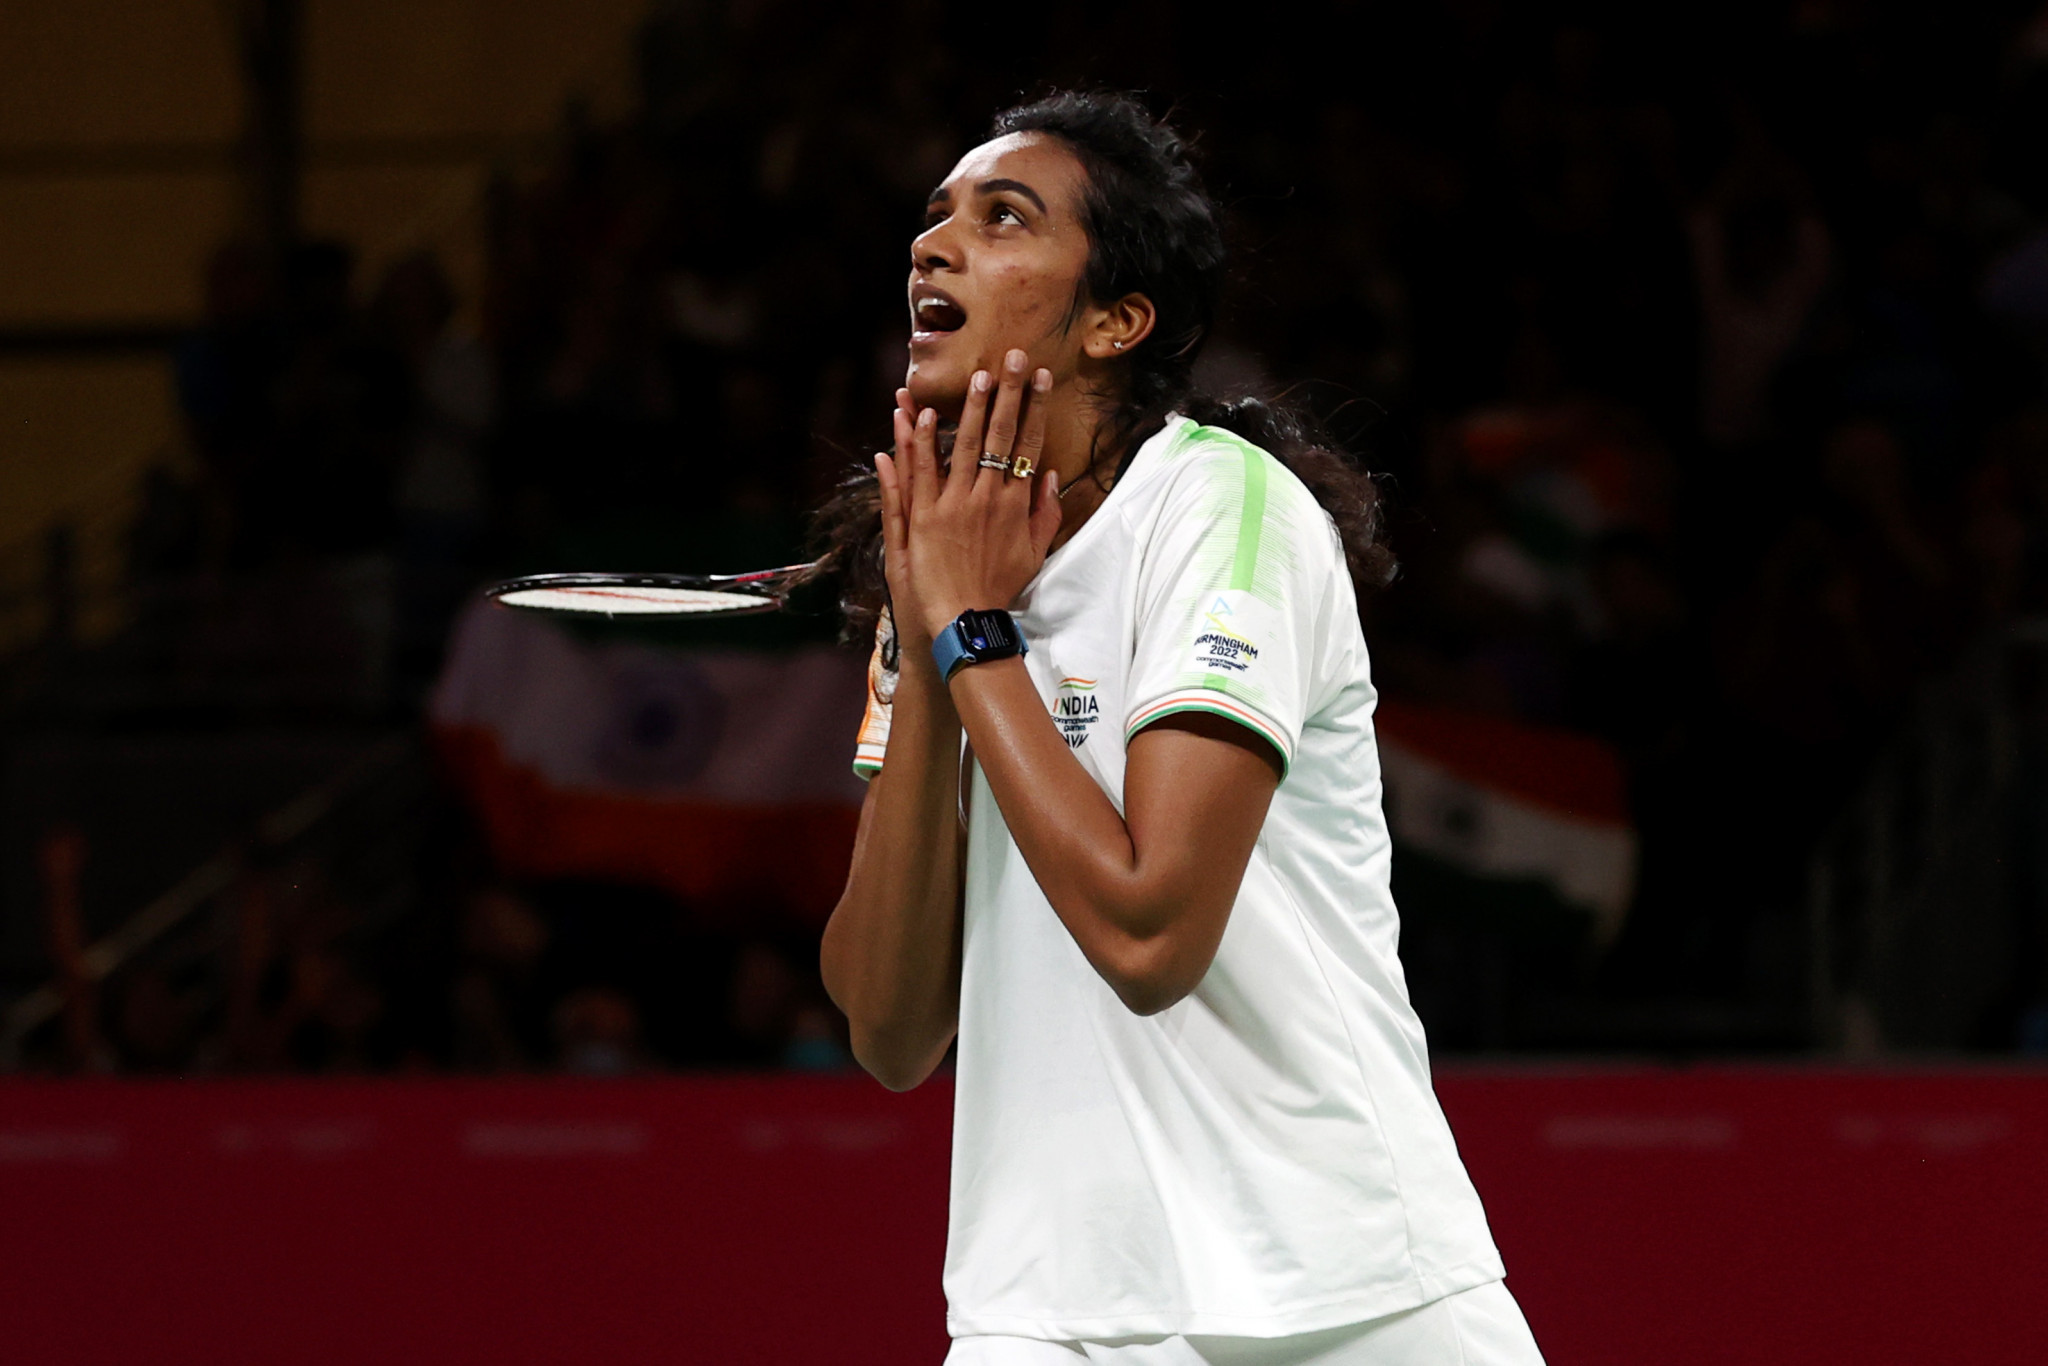 India’s Olympic medallist PV Sindhu has pulled out due to injury ©Getty Images